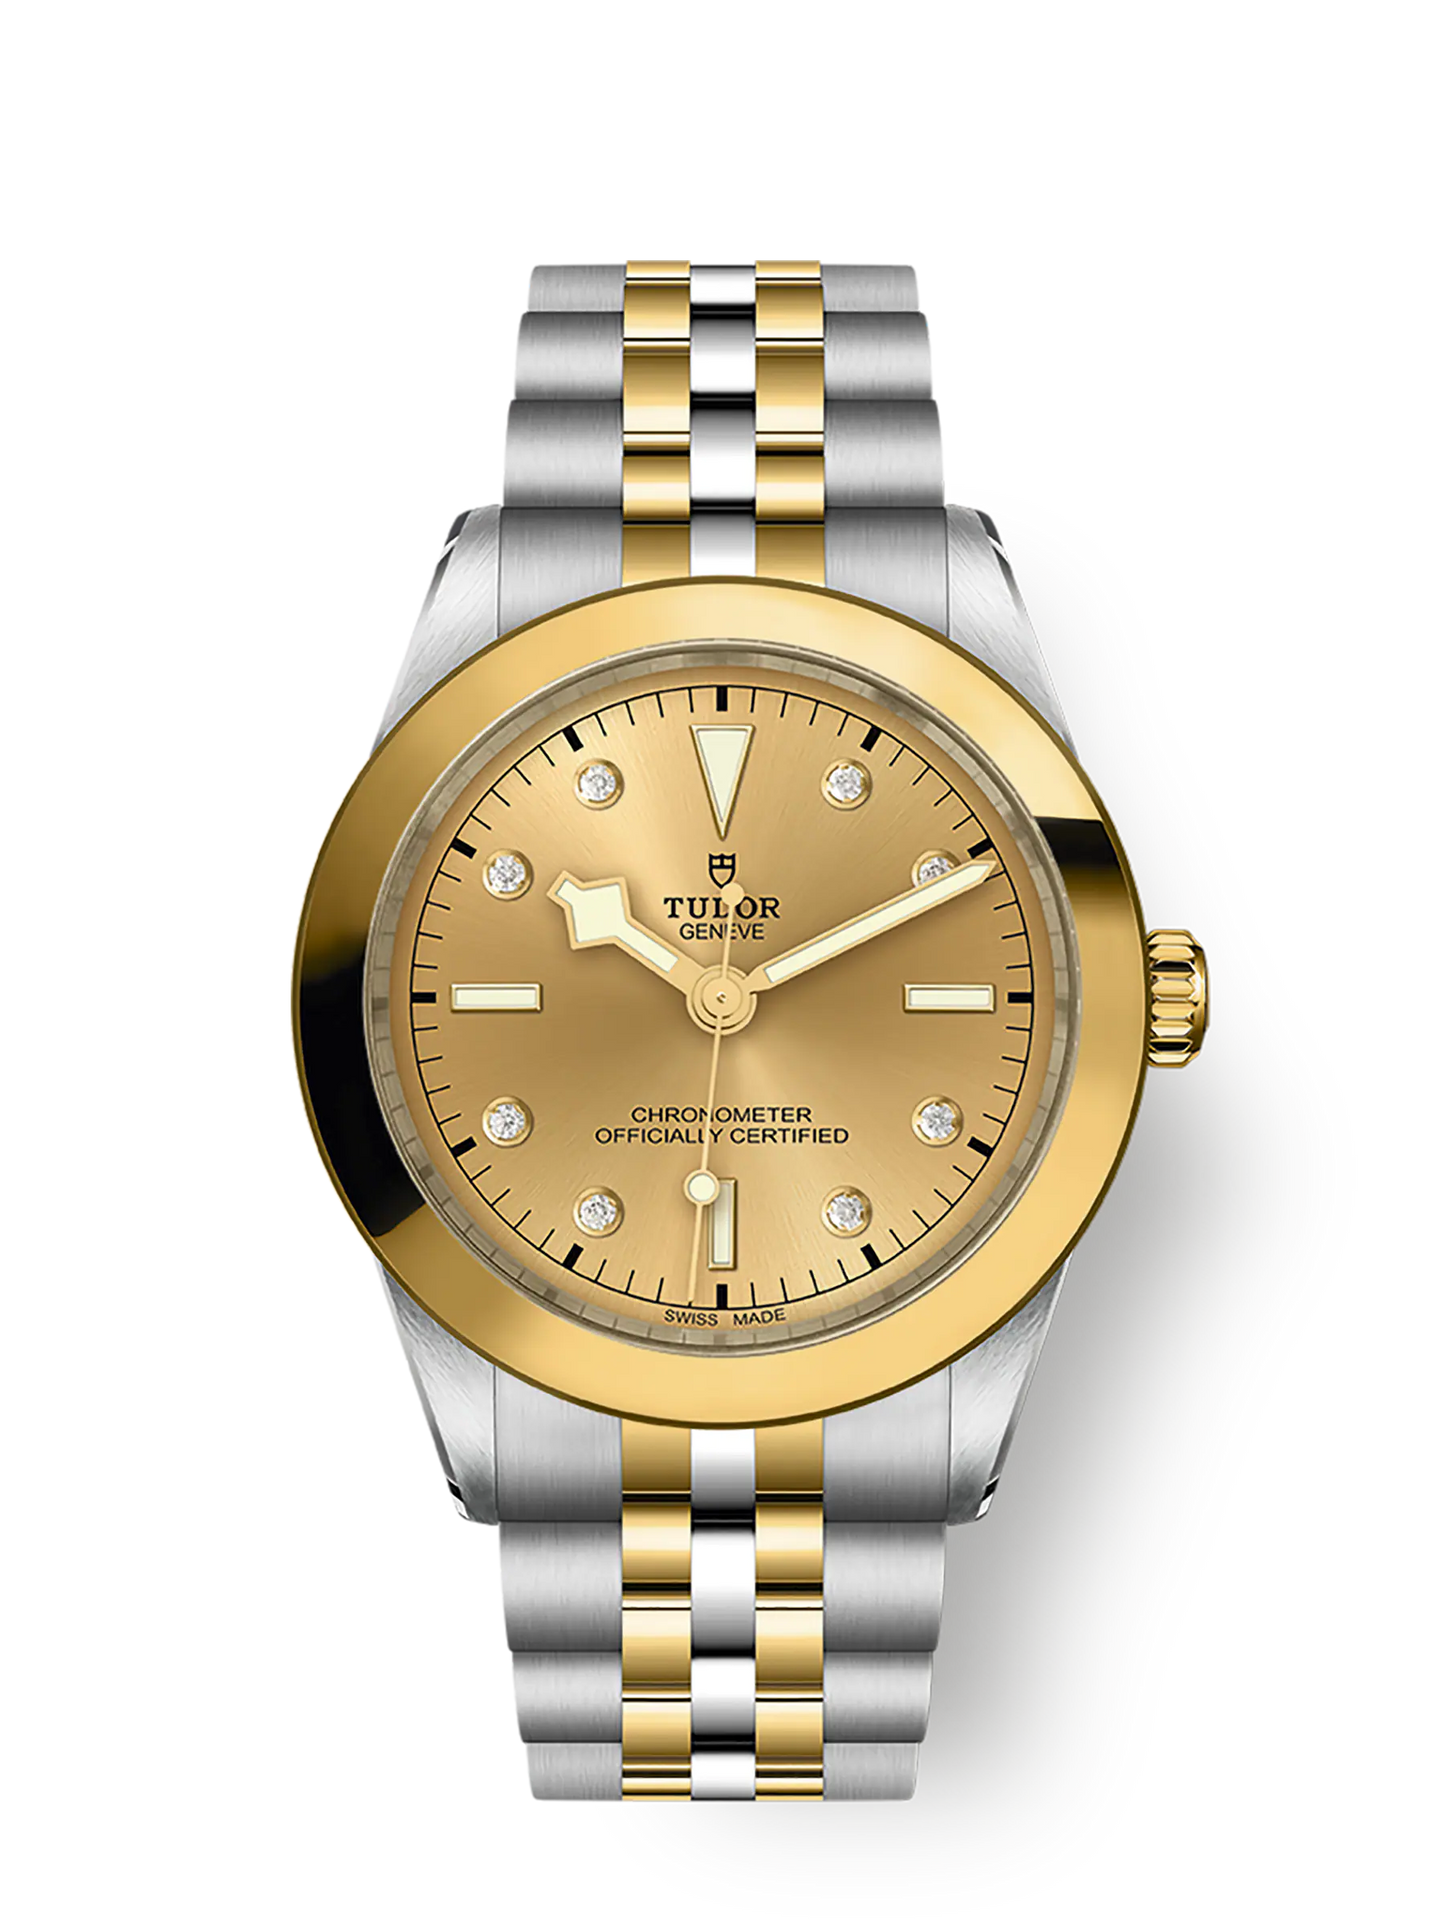 Tudor Black Bay 39 S&G, 316L Stainless Steel and 18k Yellow Gold, Ref# M79663-0008